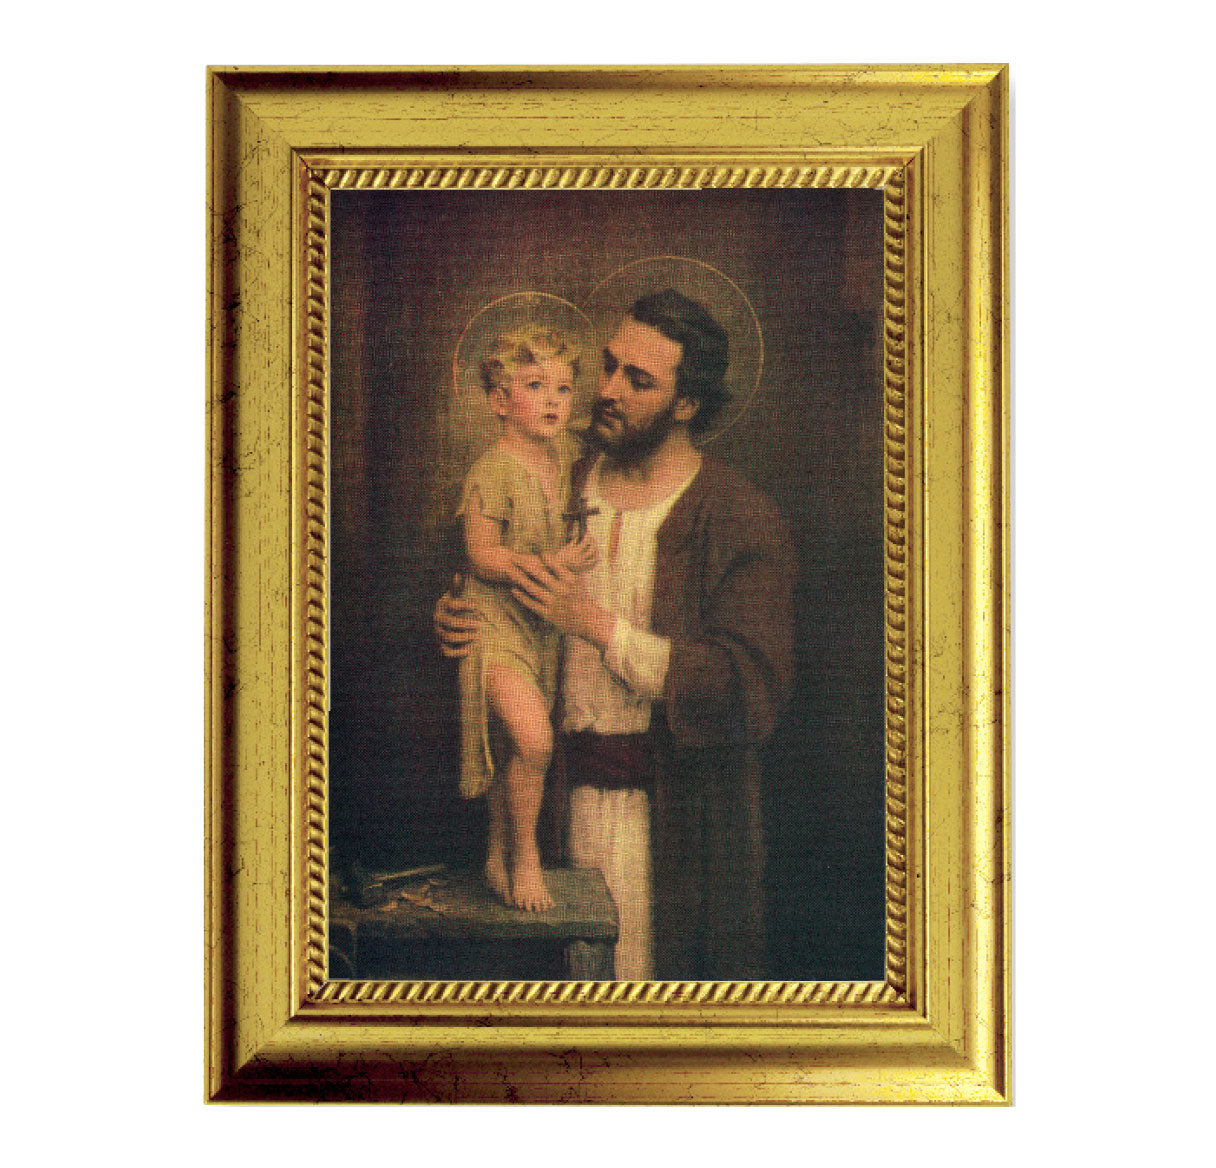 St. Joseph Picture Framed Wall Art Decor, Small, Antique Gold-Leaf Frame with Rope Detailed Lip